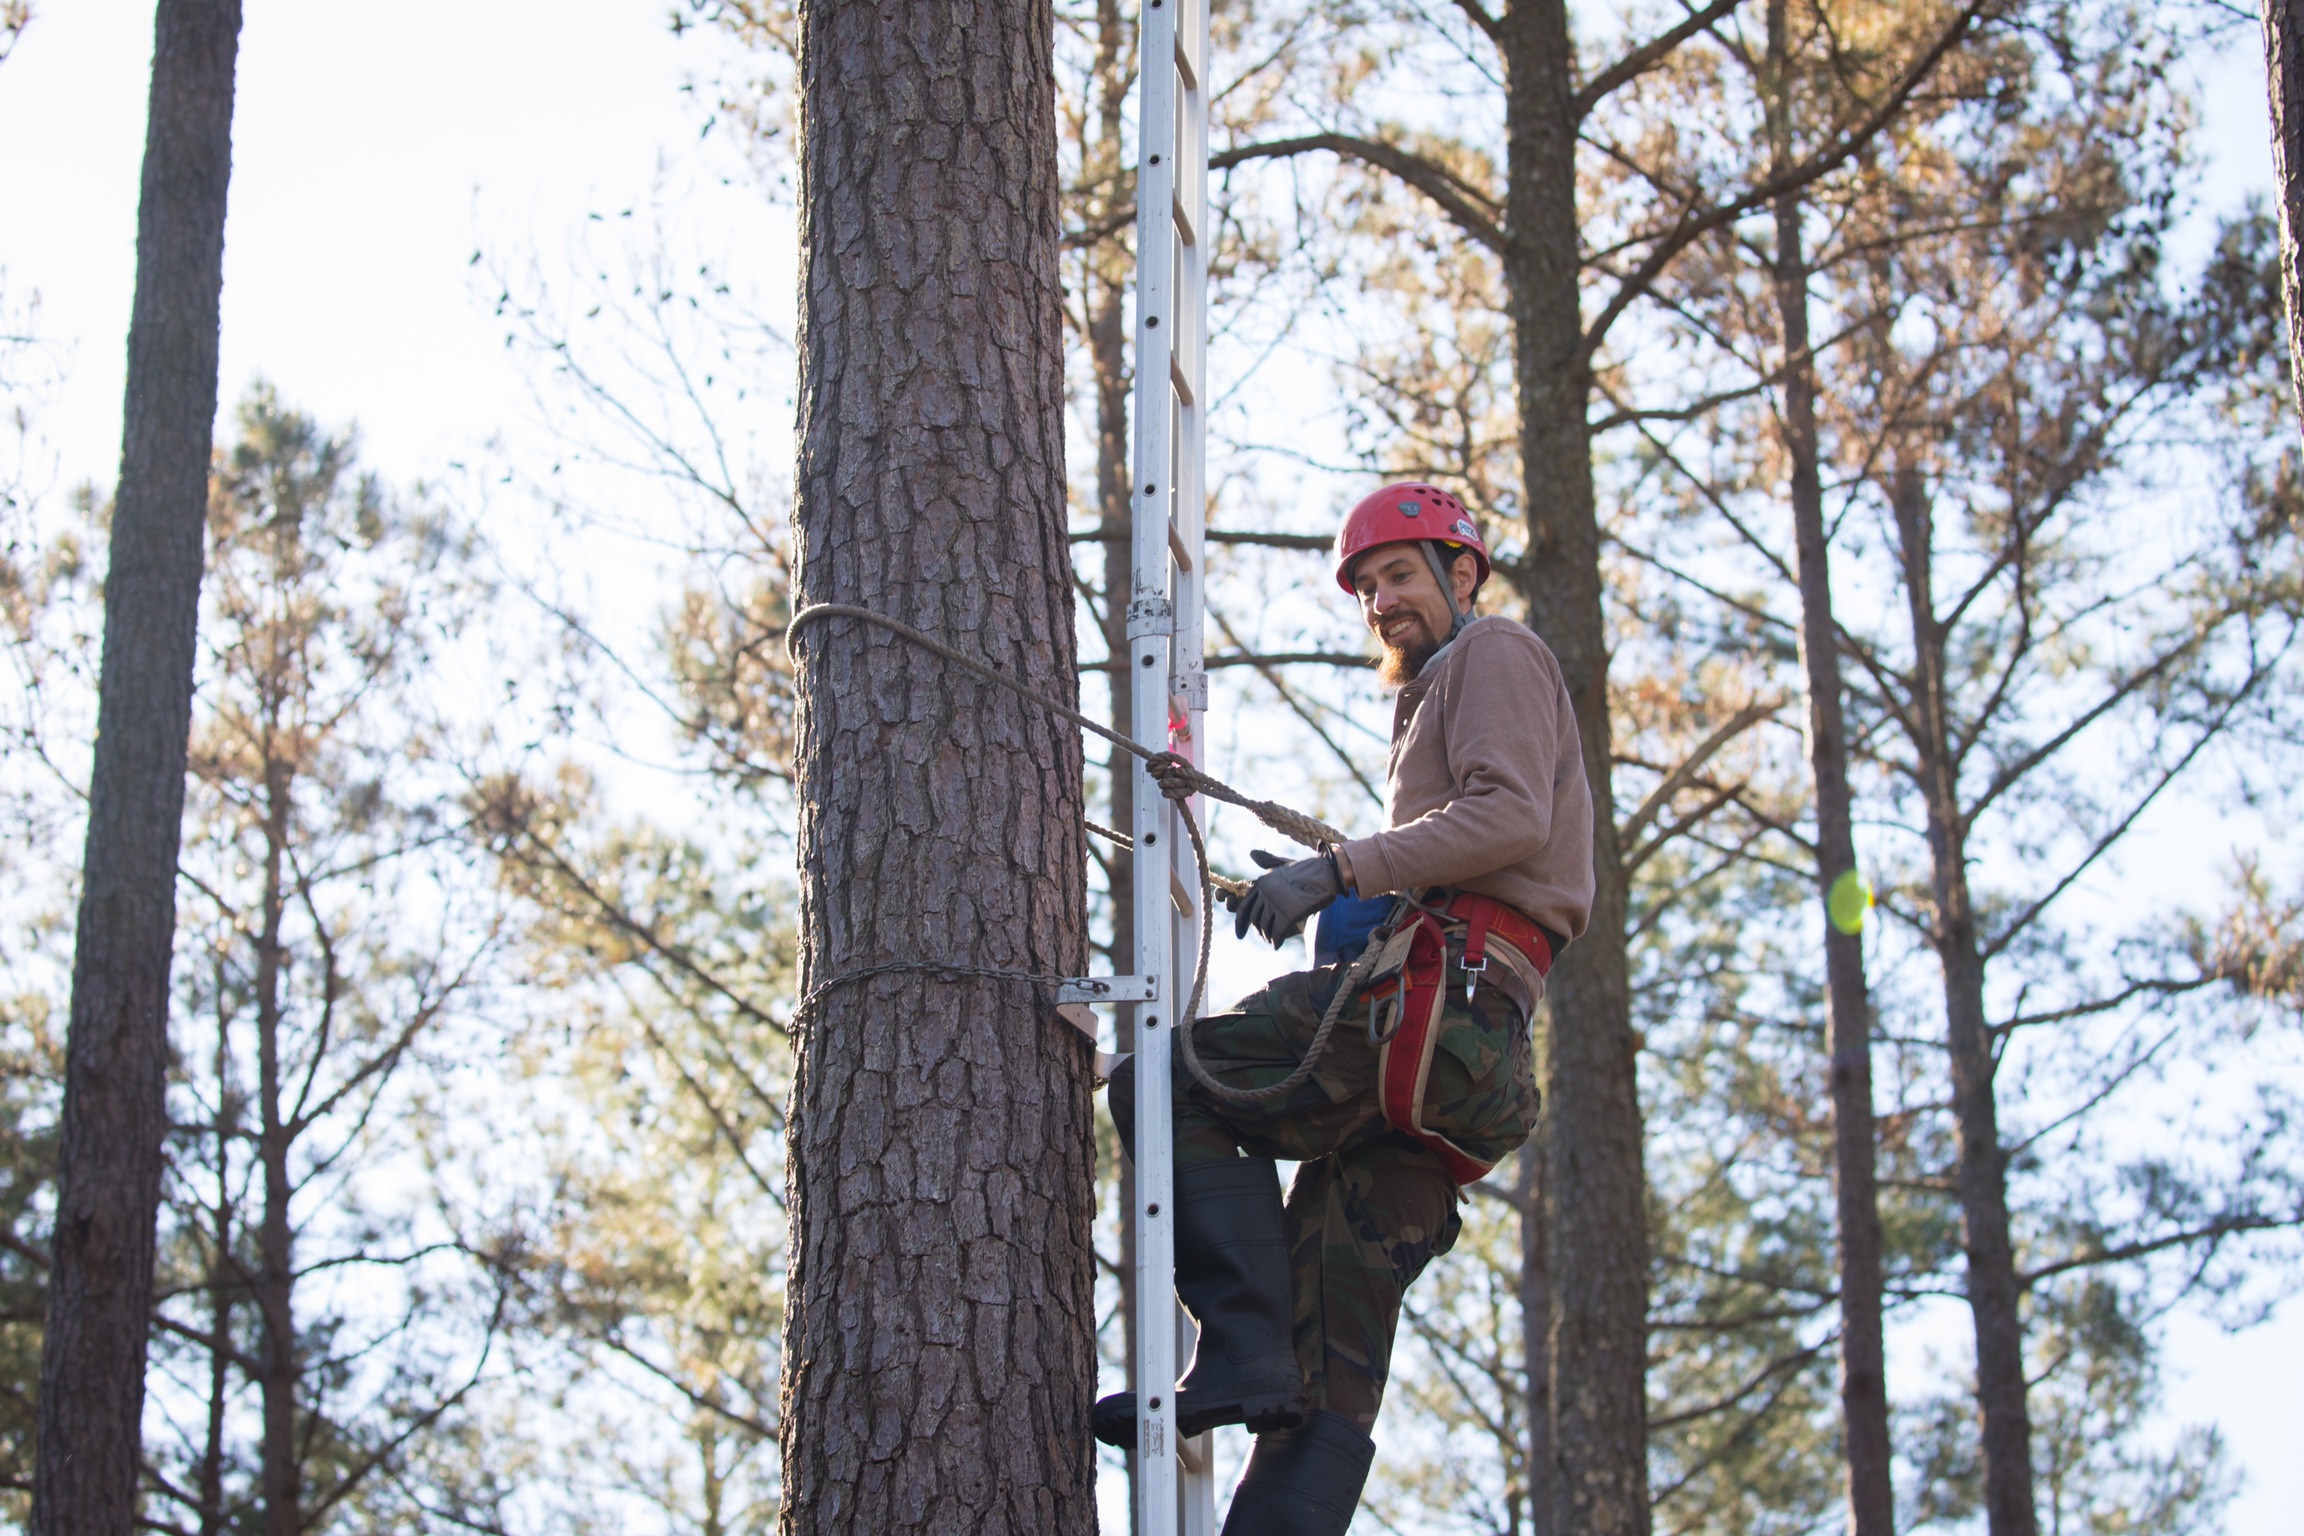 An image of a man climbing a tree with a ladder and harness system